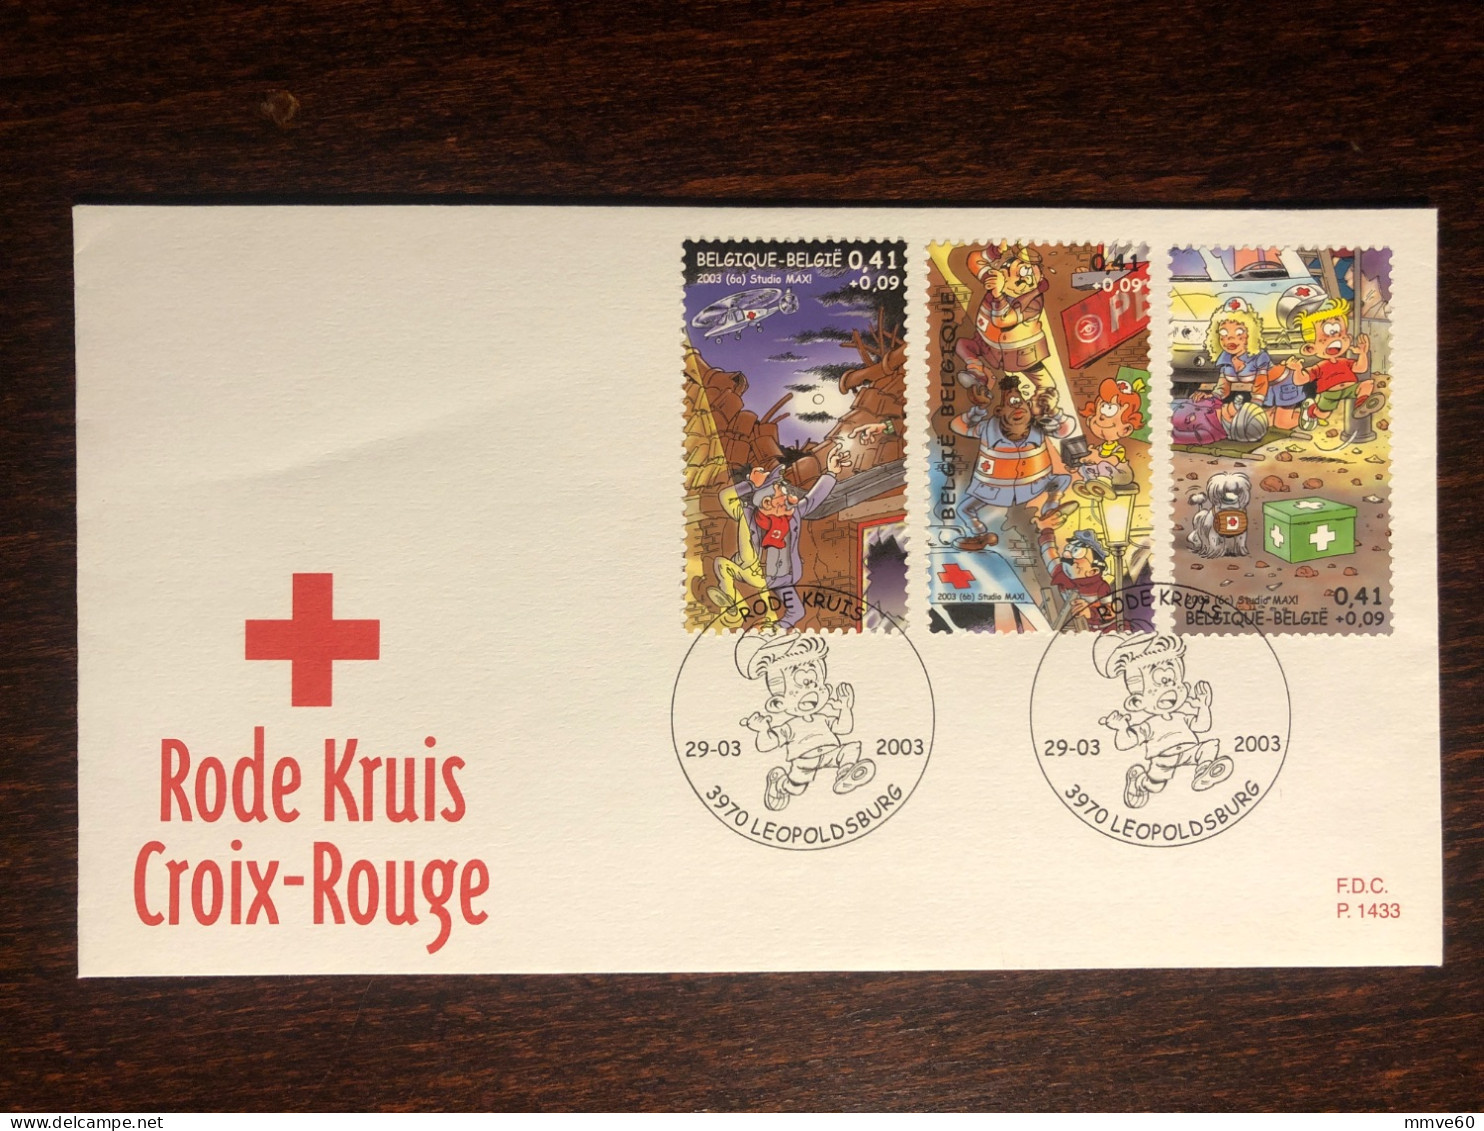 BELGIUM FDC COVER 2003 YEAR RED CROSS HEALTH MEDICINE STAMPS - Lettres & Documents